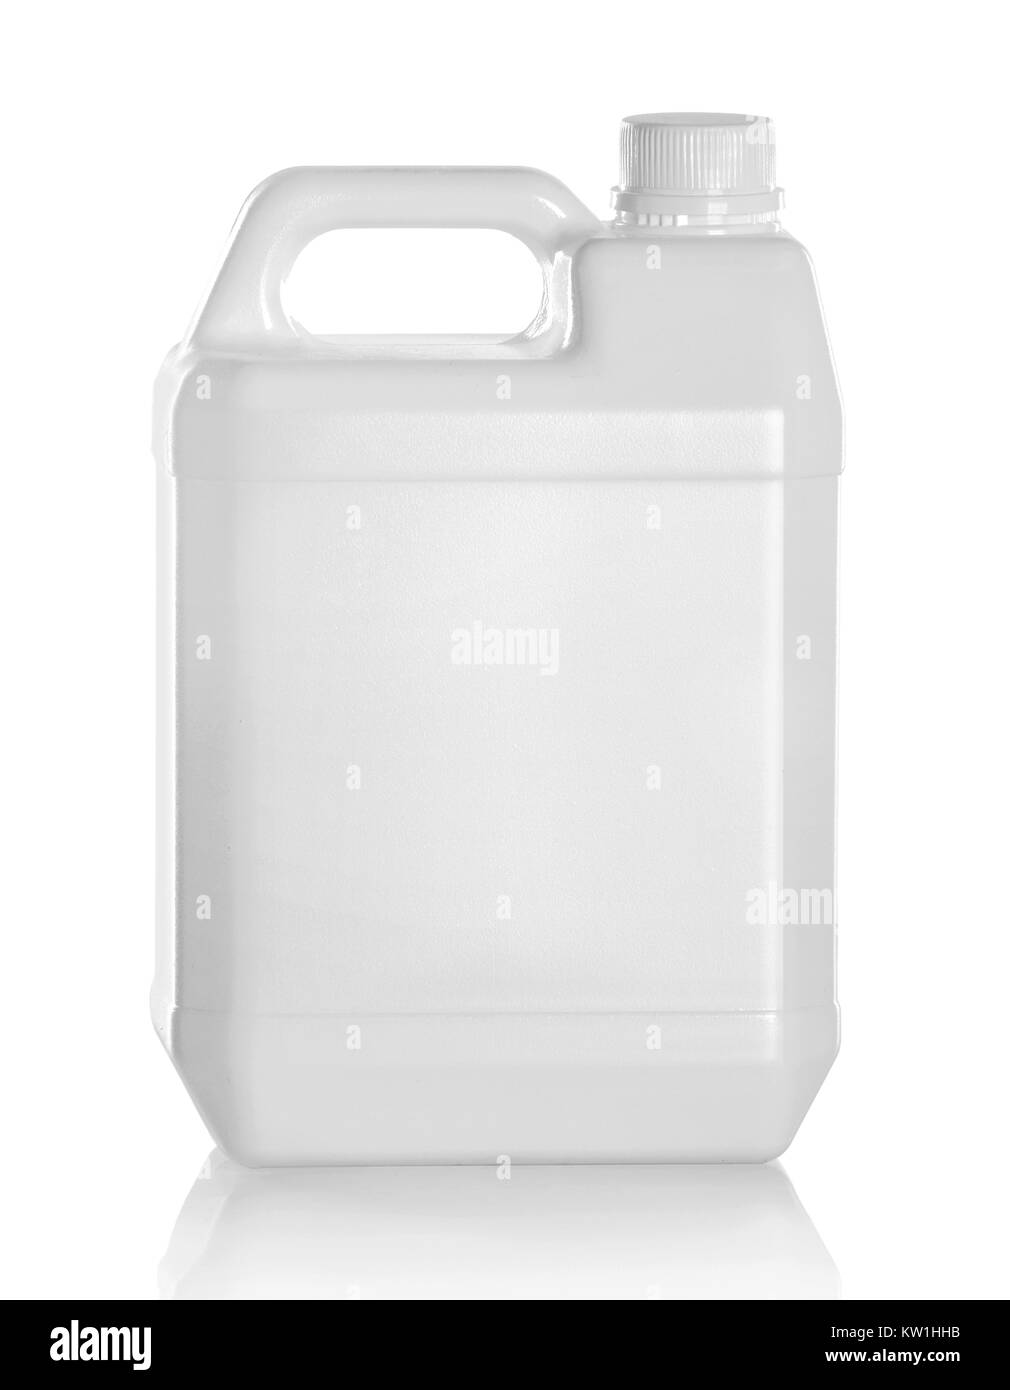 plastic jerry can Stock Photo - Alamy